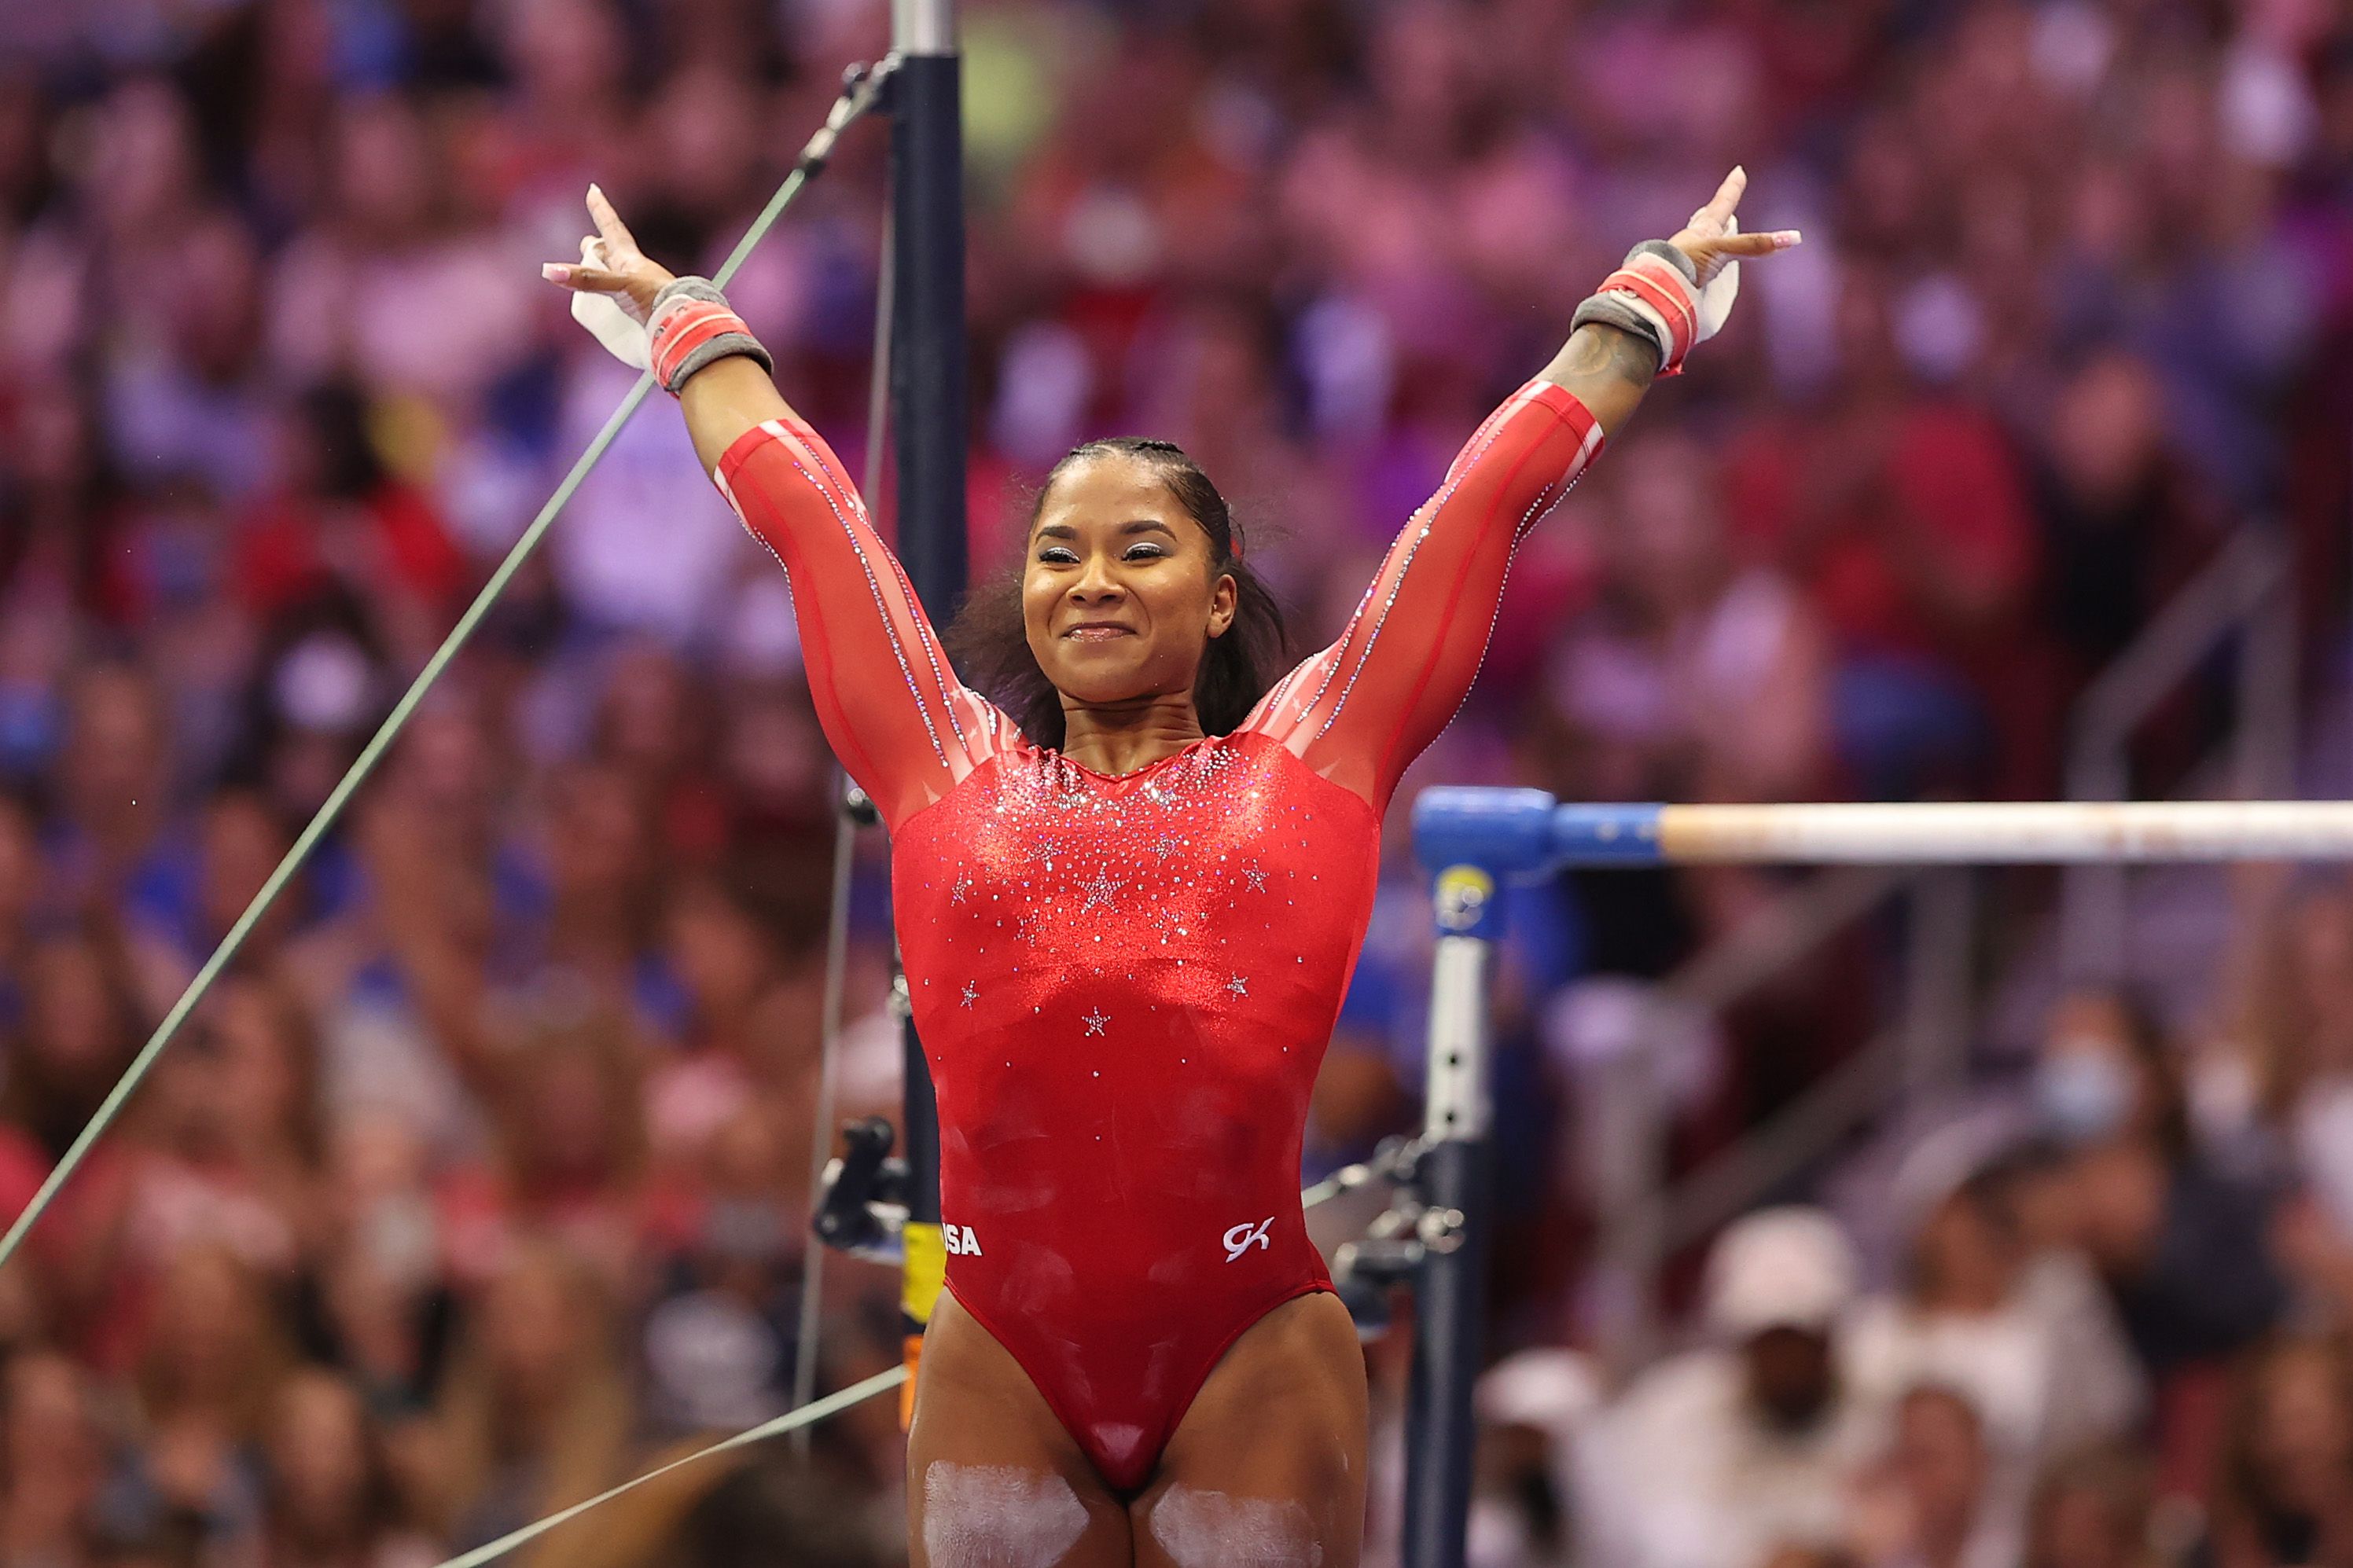 Meet Jordan Chiles 9 Facts About The Elite Team Usa Gymnast